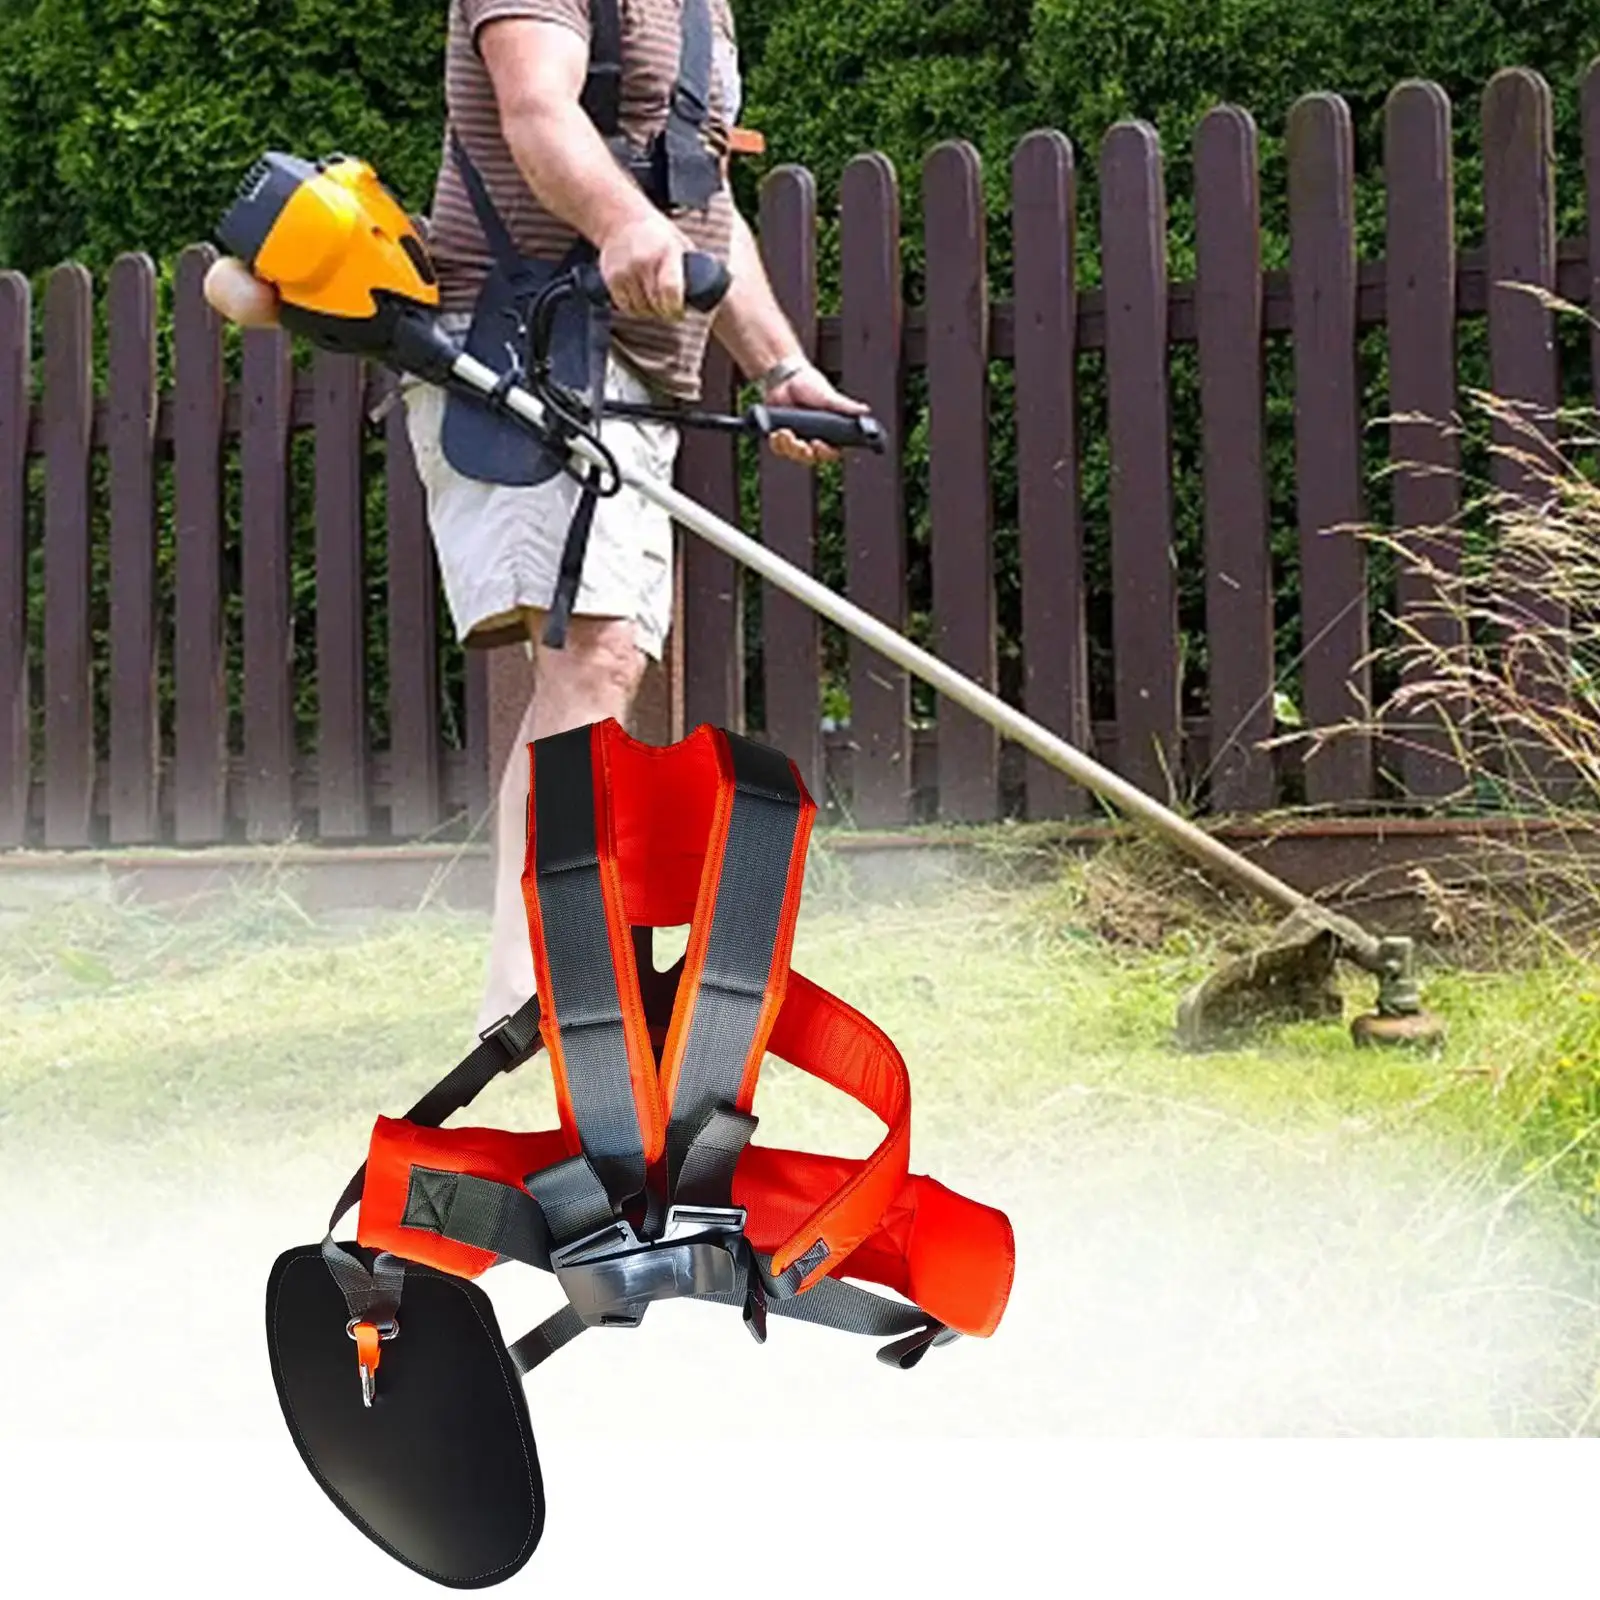 Universal Lawn Trimmer Mower Double Shoulder Strap Orange and Gray Convenient to Wear Oxford Cloth for Agricultural Tool Durable